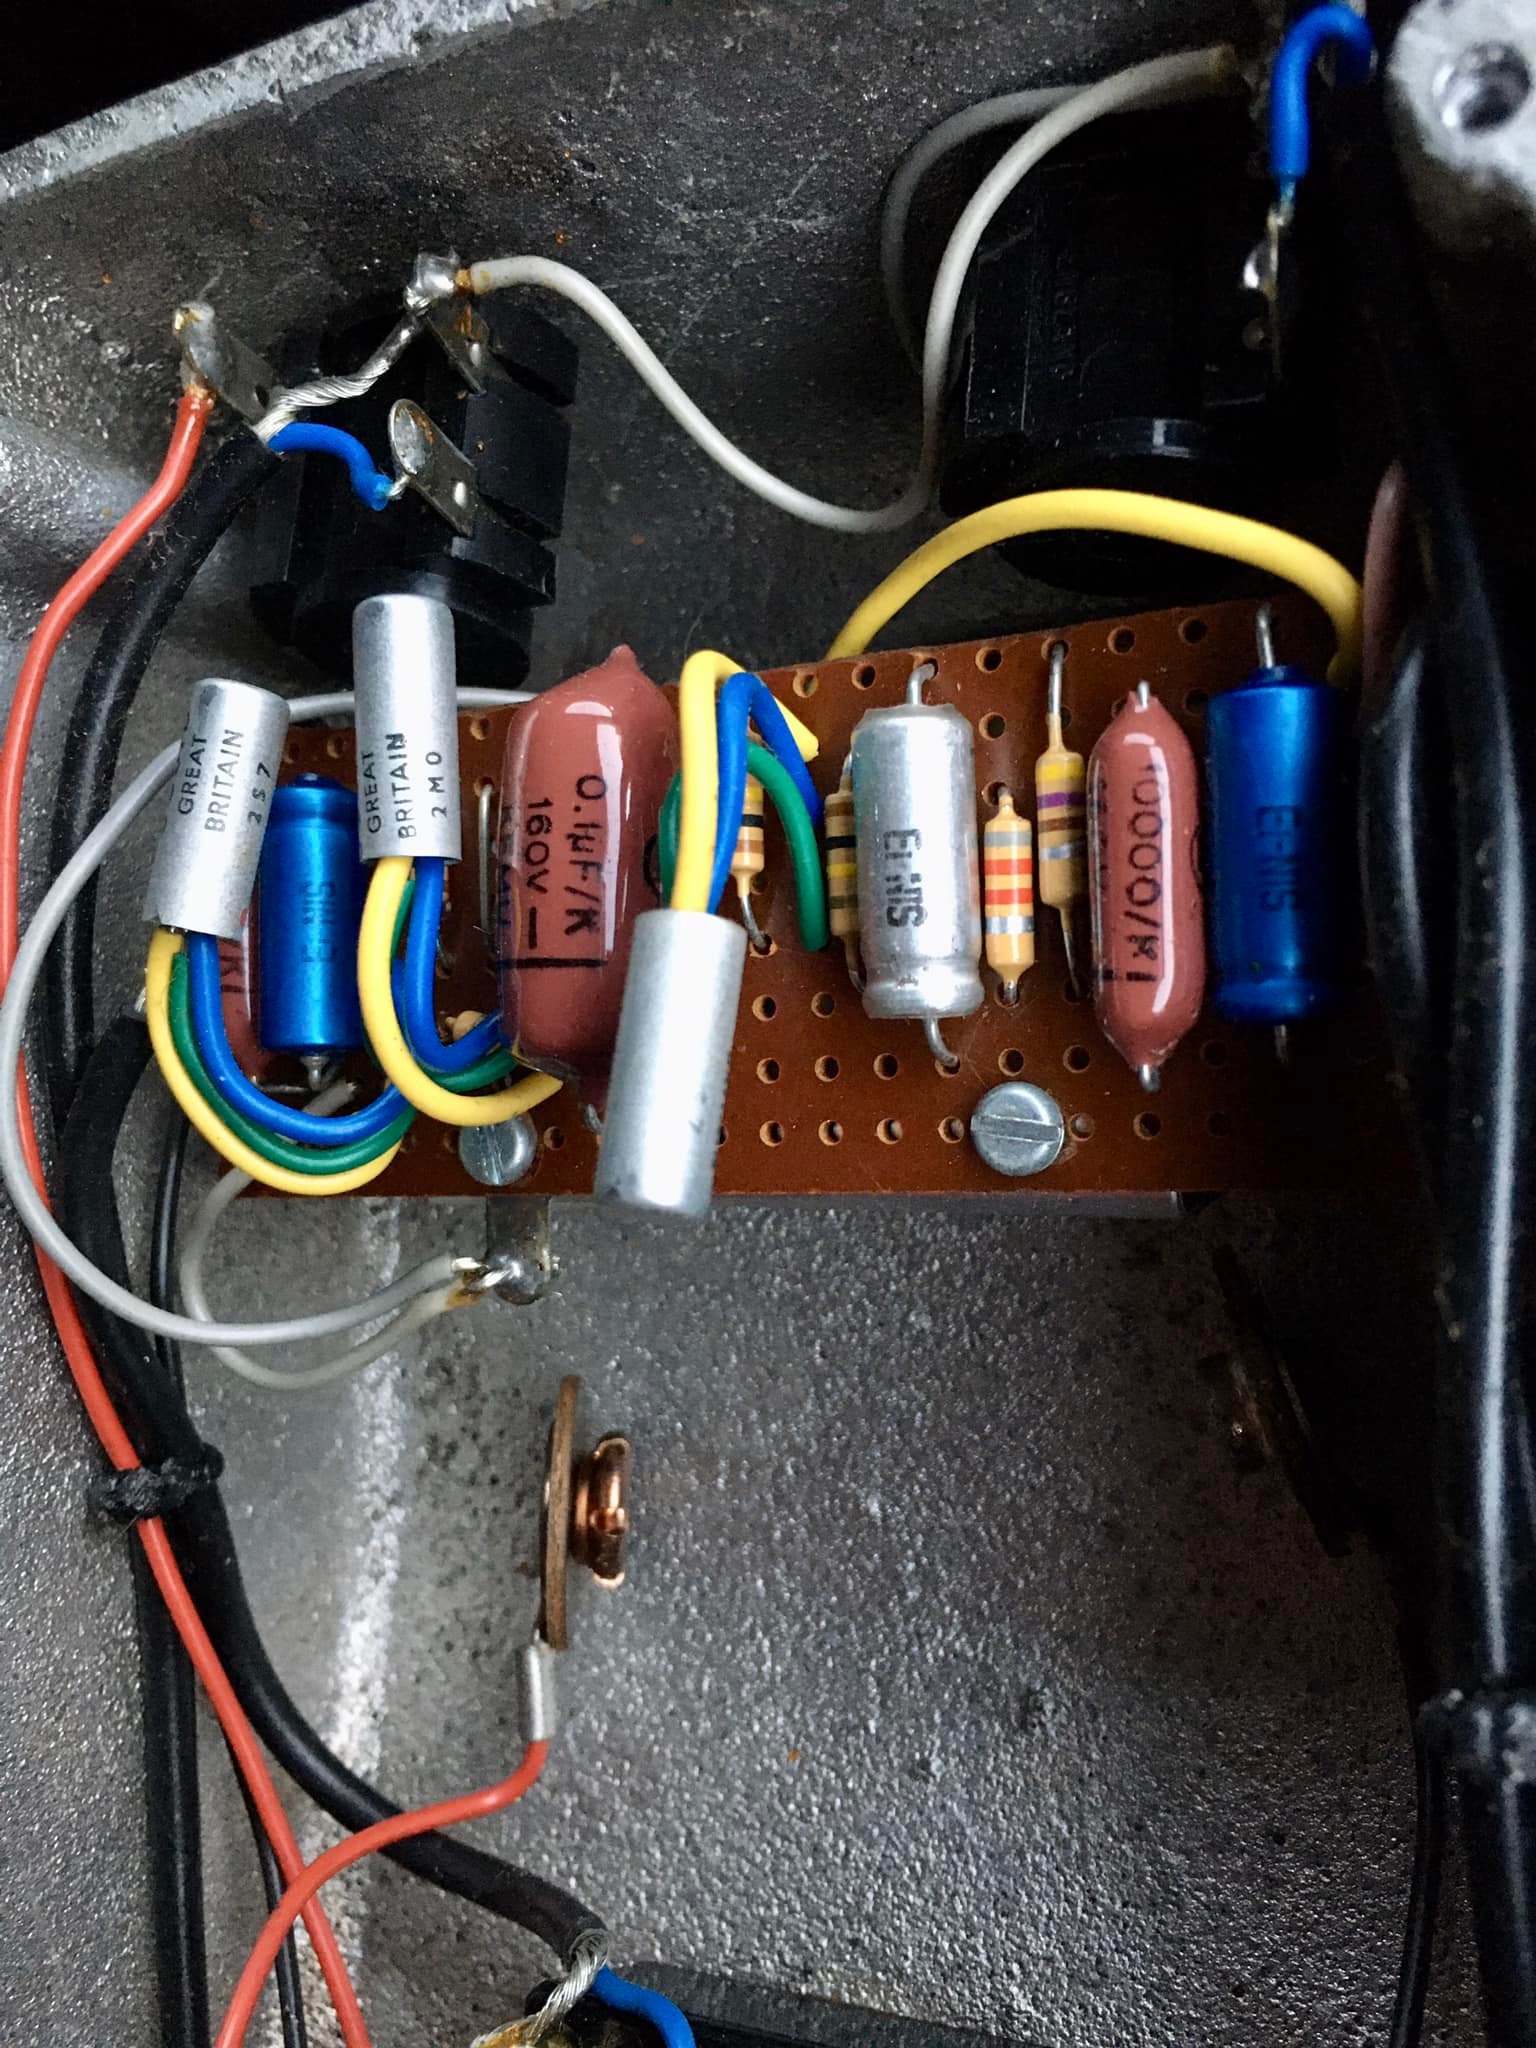 Internals of a Zonk II pedal, with Tone Bender MKII circuit (Photo credit: R. Green)